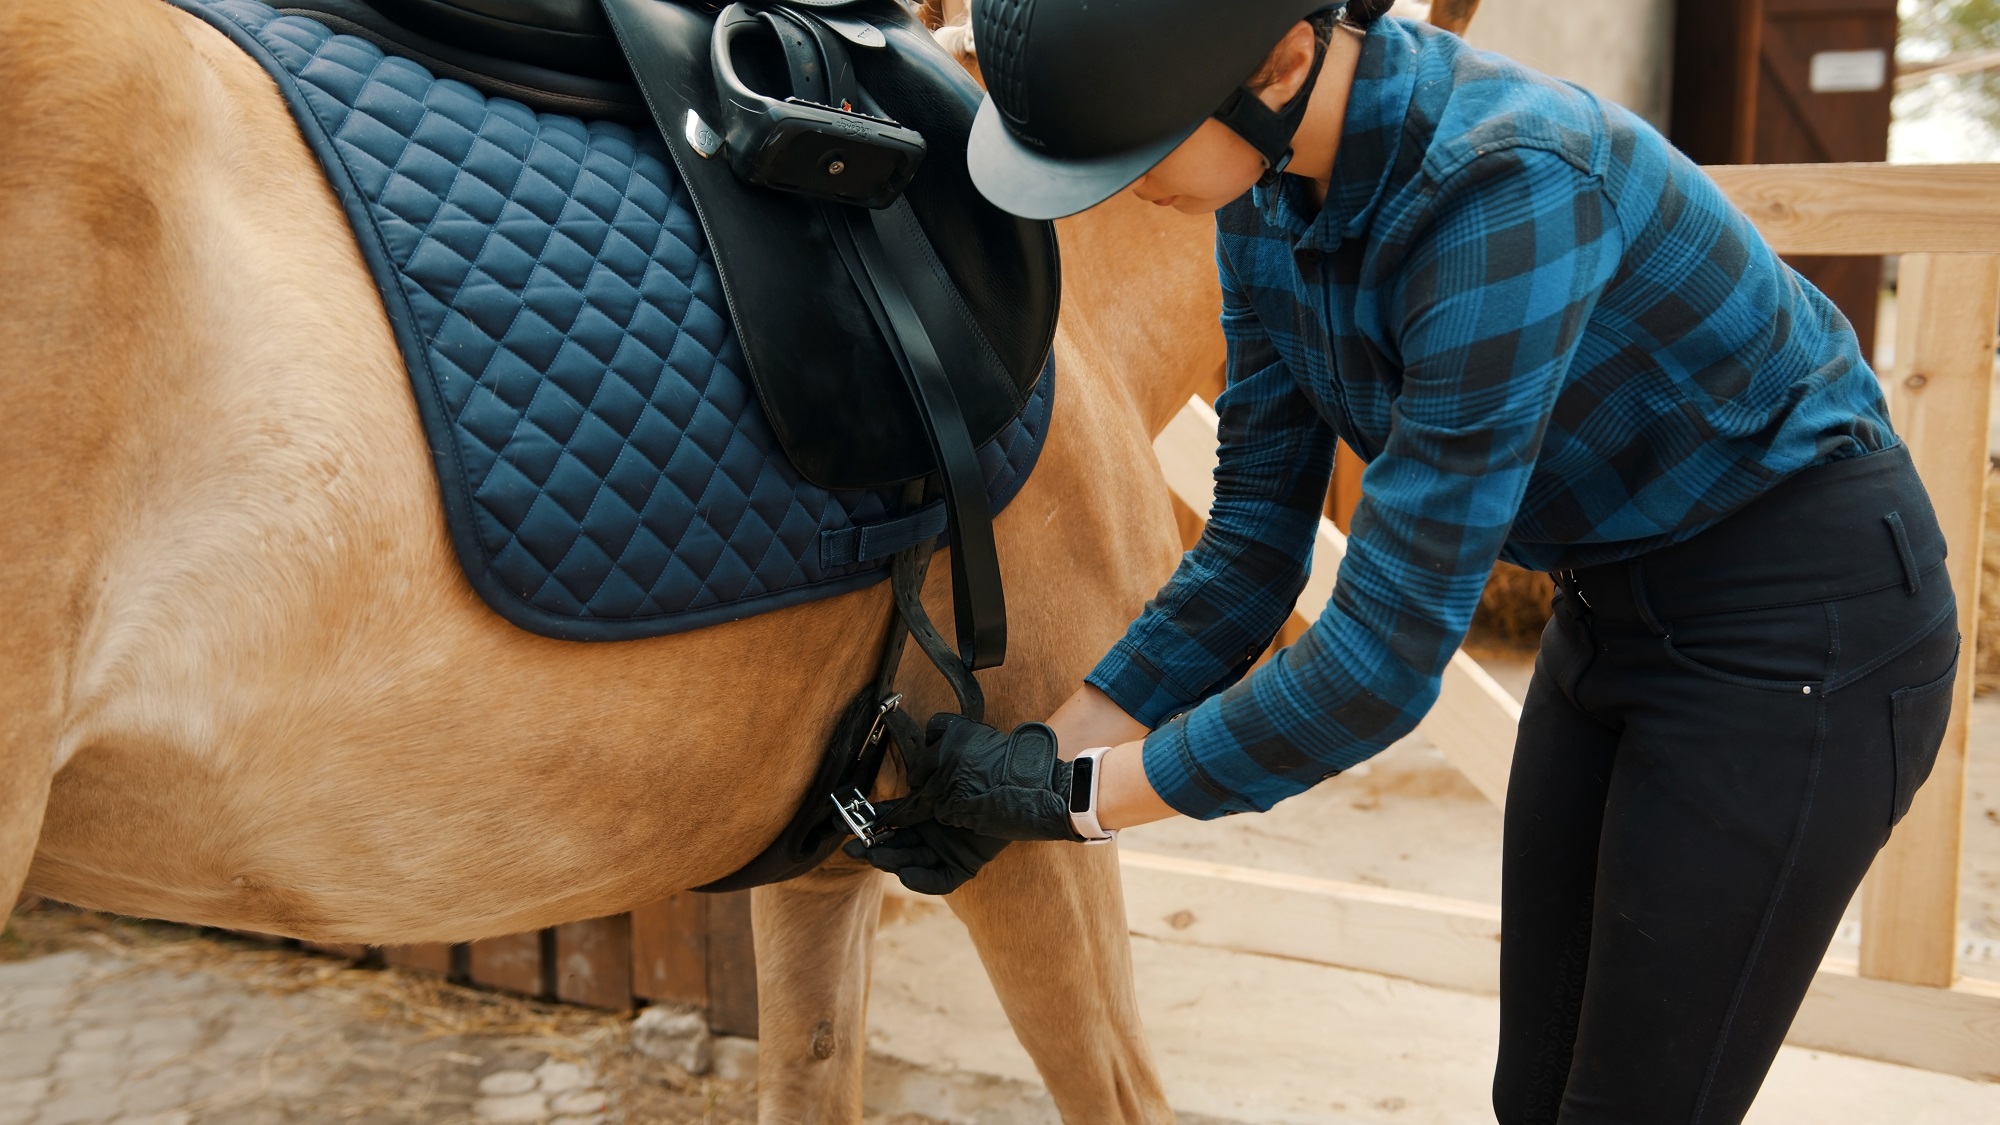 Horse rider saddling up a light brown horse outside the stable. Tying up the leather strap of the saddle. The rider is wearing a helmet and gloves.